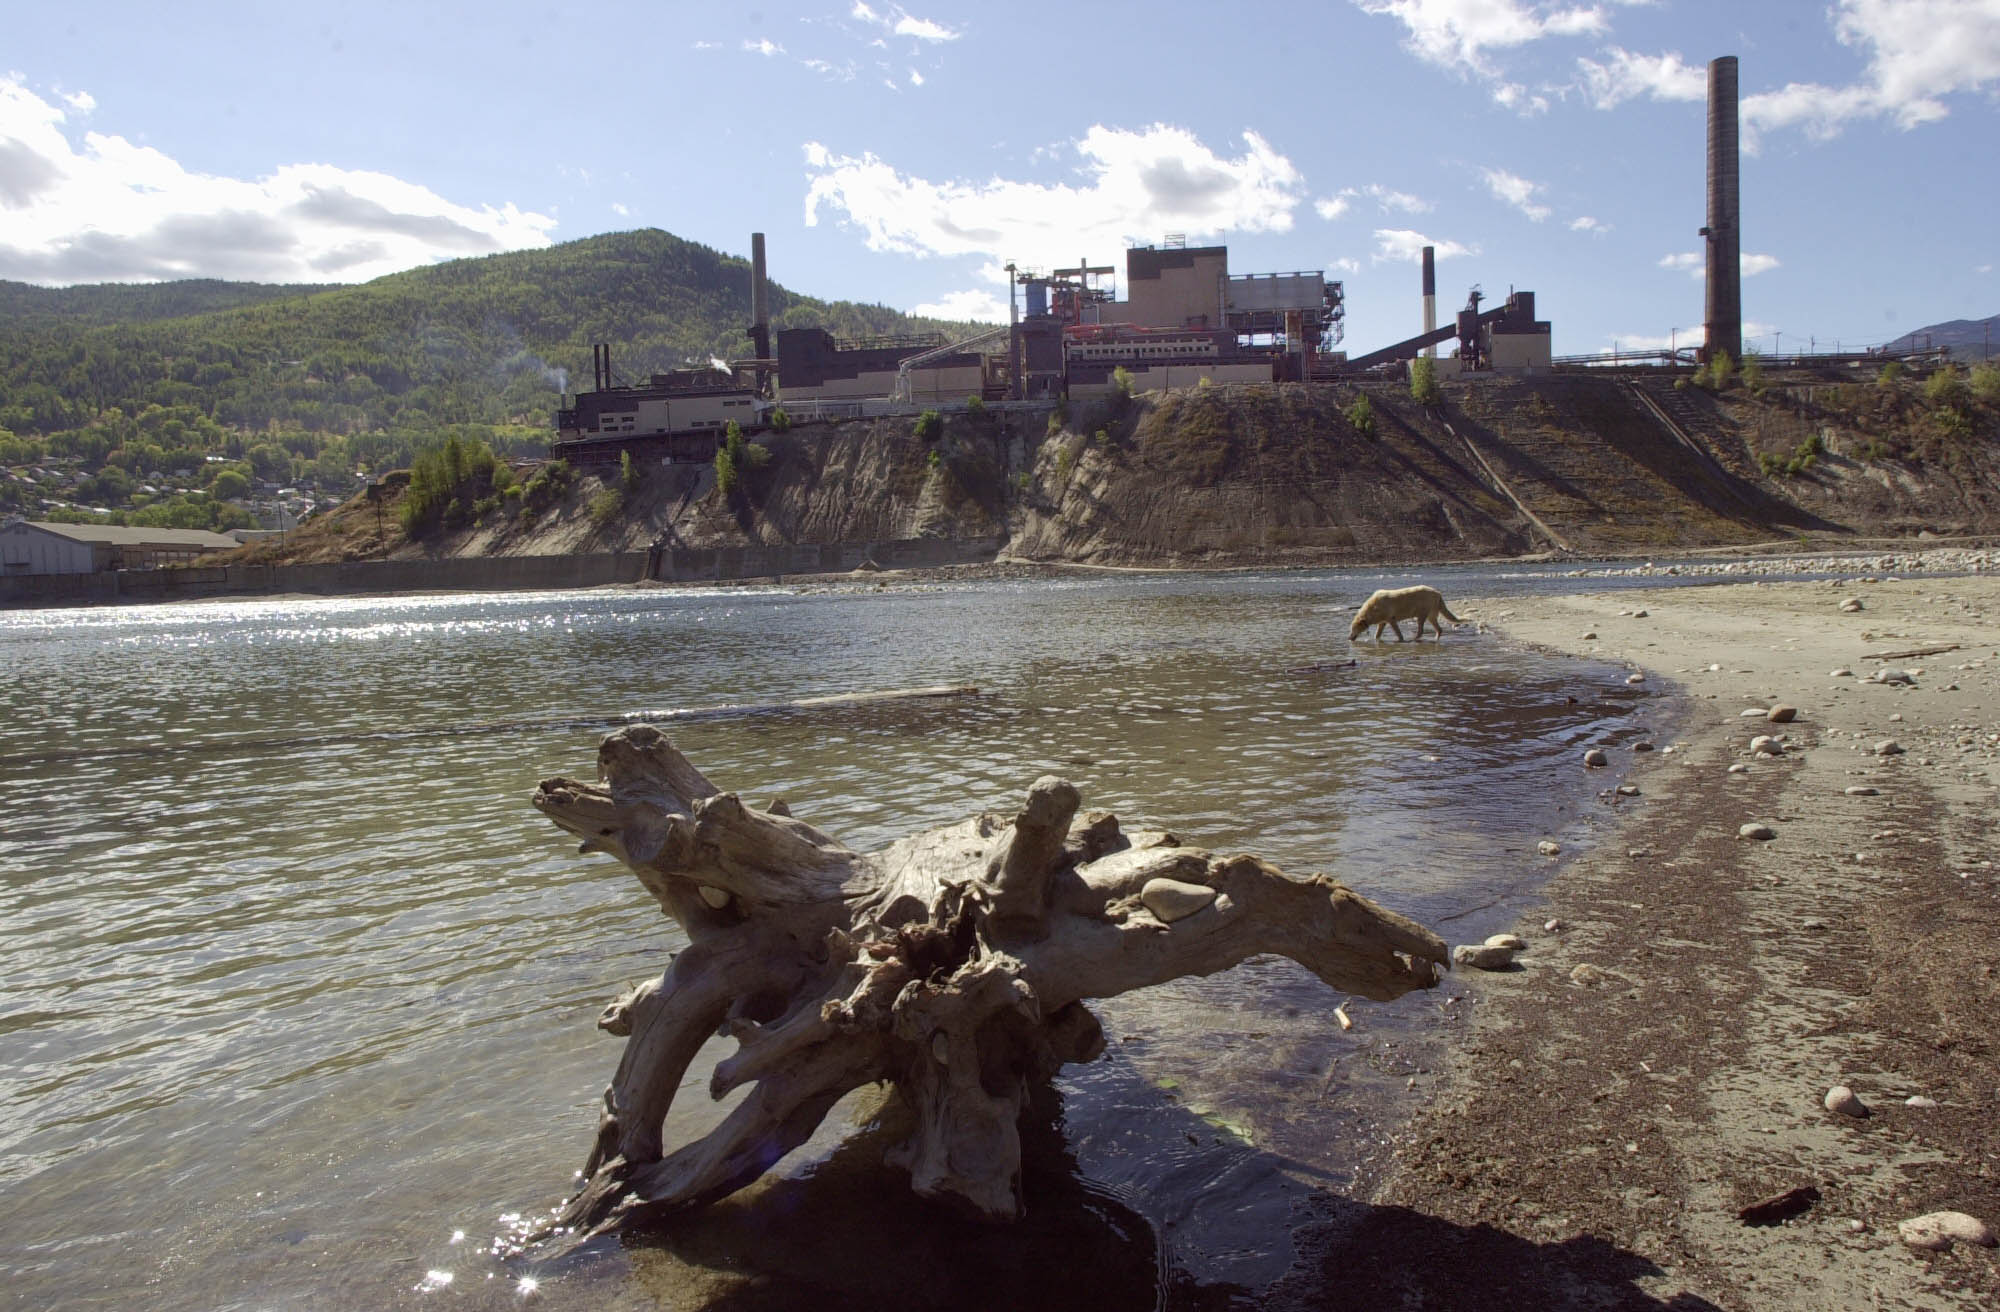 In this 2002 photo, a dog drinks from the Columbia River in the shadow of Teck Cominco smelter, six miles north of the Canadian border at Trail, British Columbia. CREDIT: CHERYL HATCH/AP